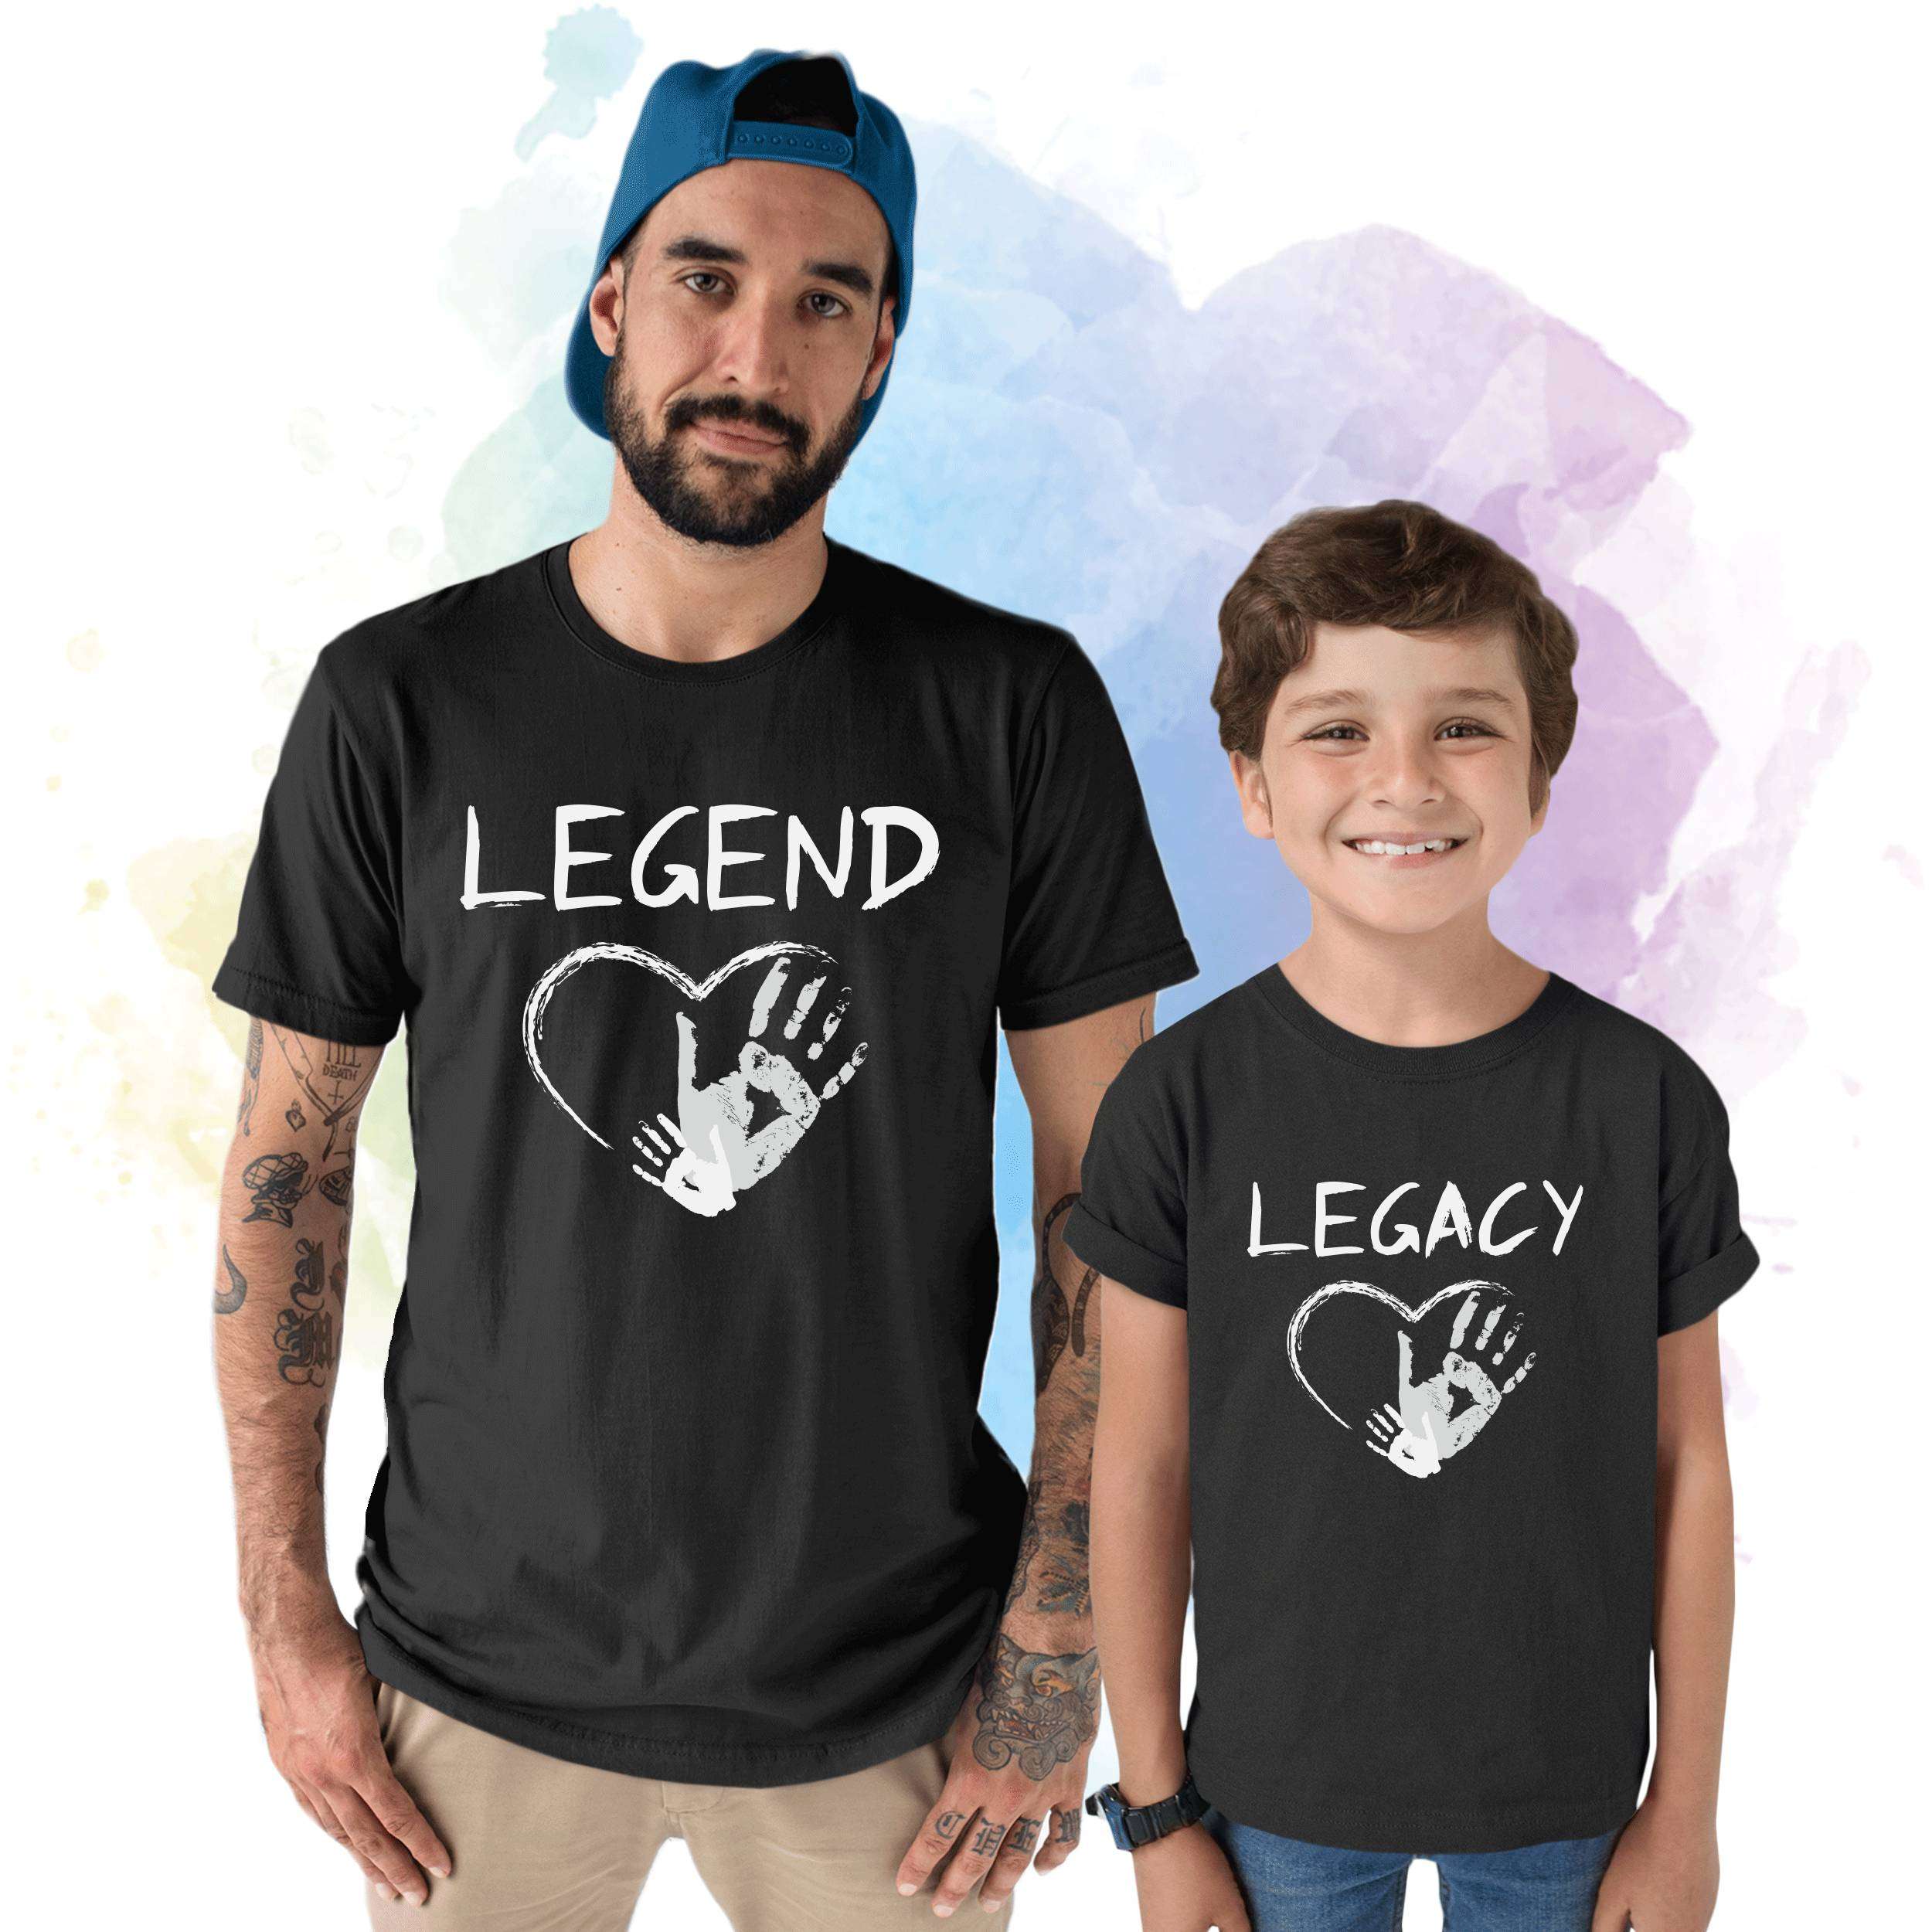 Legend Legacy Shirts, Father and Kid Matching Outfit, Father's Day Shirts